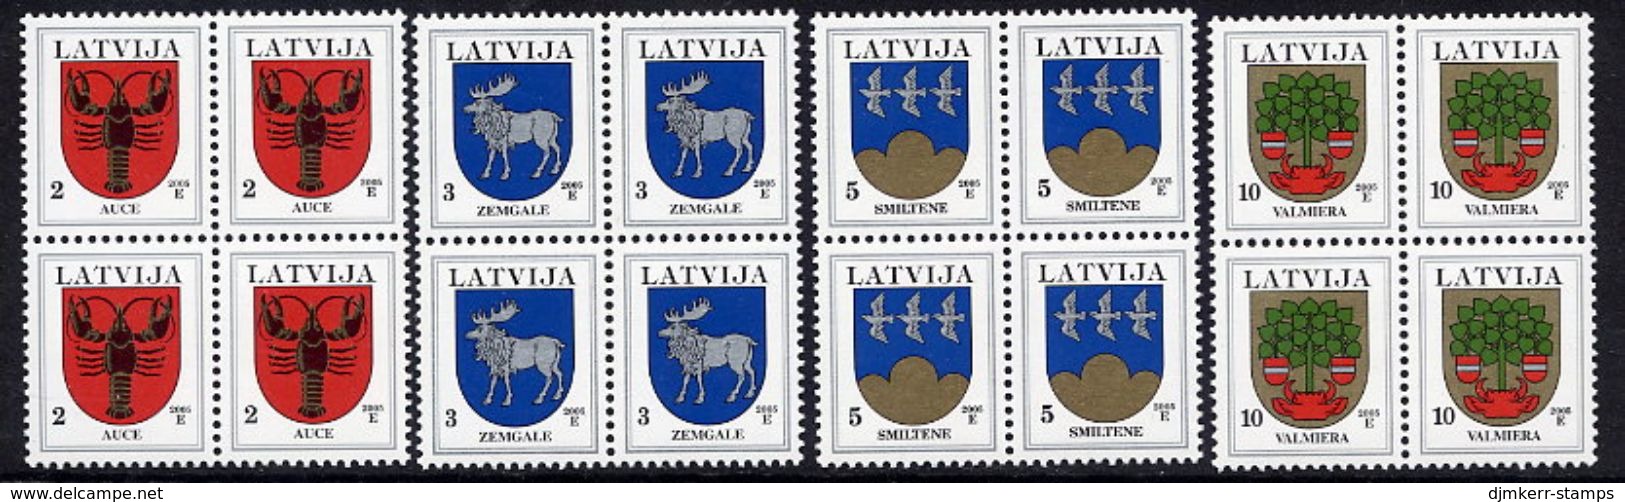 LATVIA 2005 Arms Definitives With Year Date 2005 In Blocks Of 4 MNH / **. - Letonia